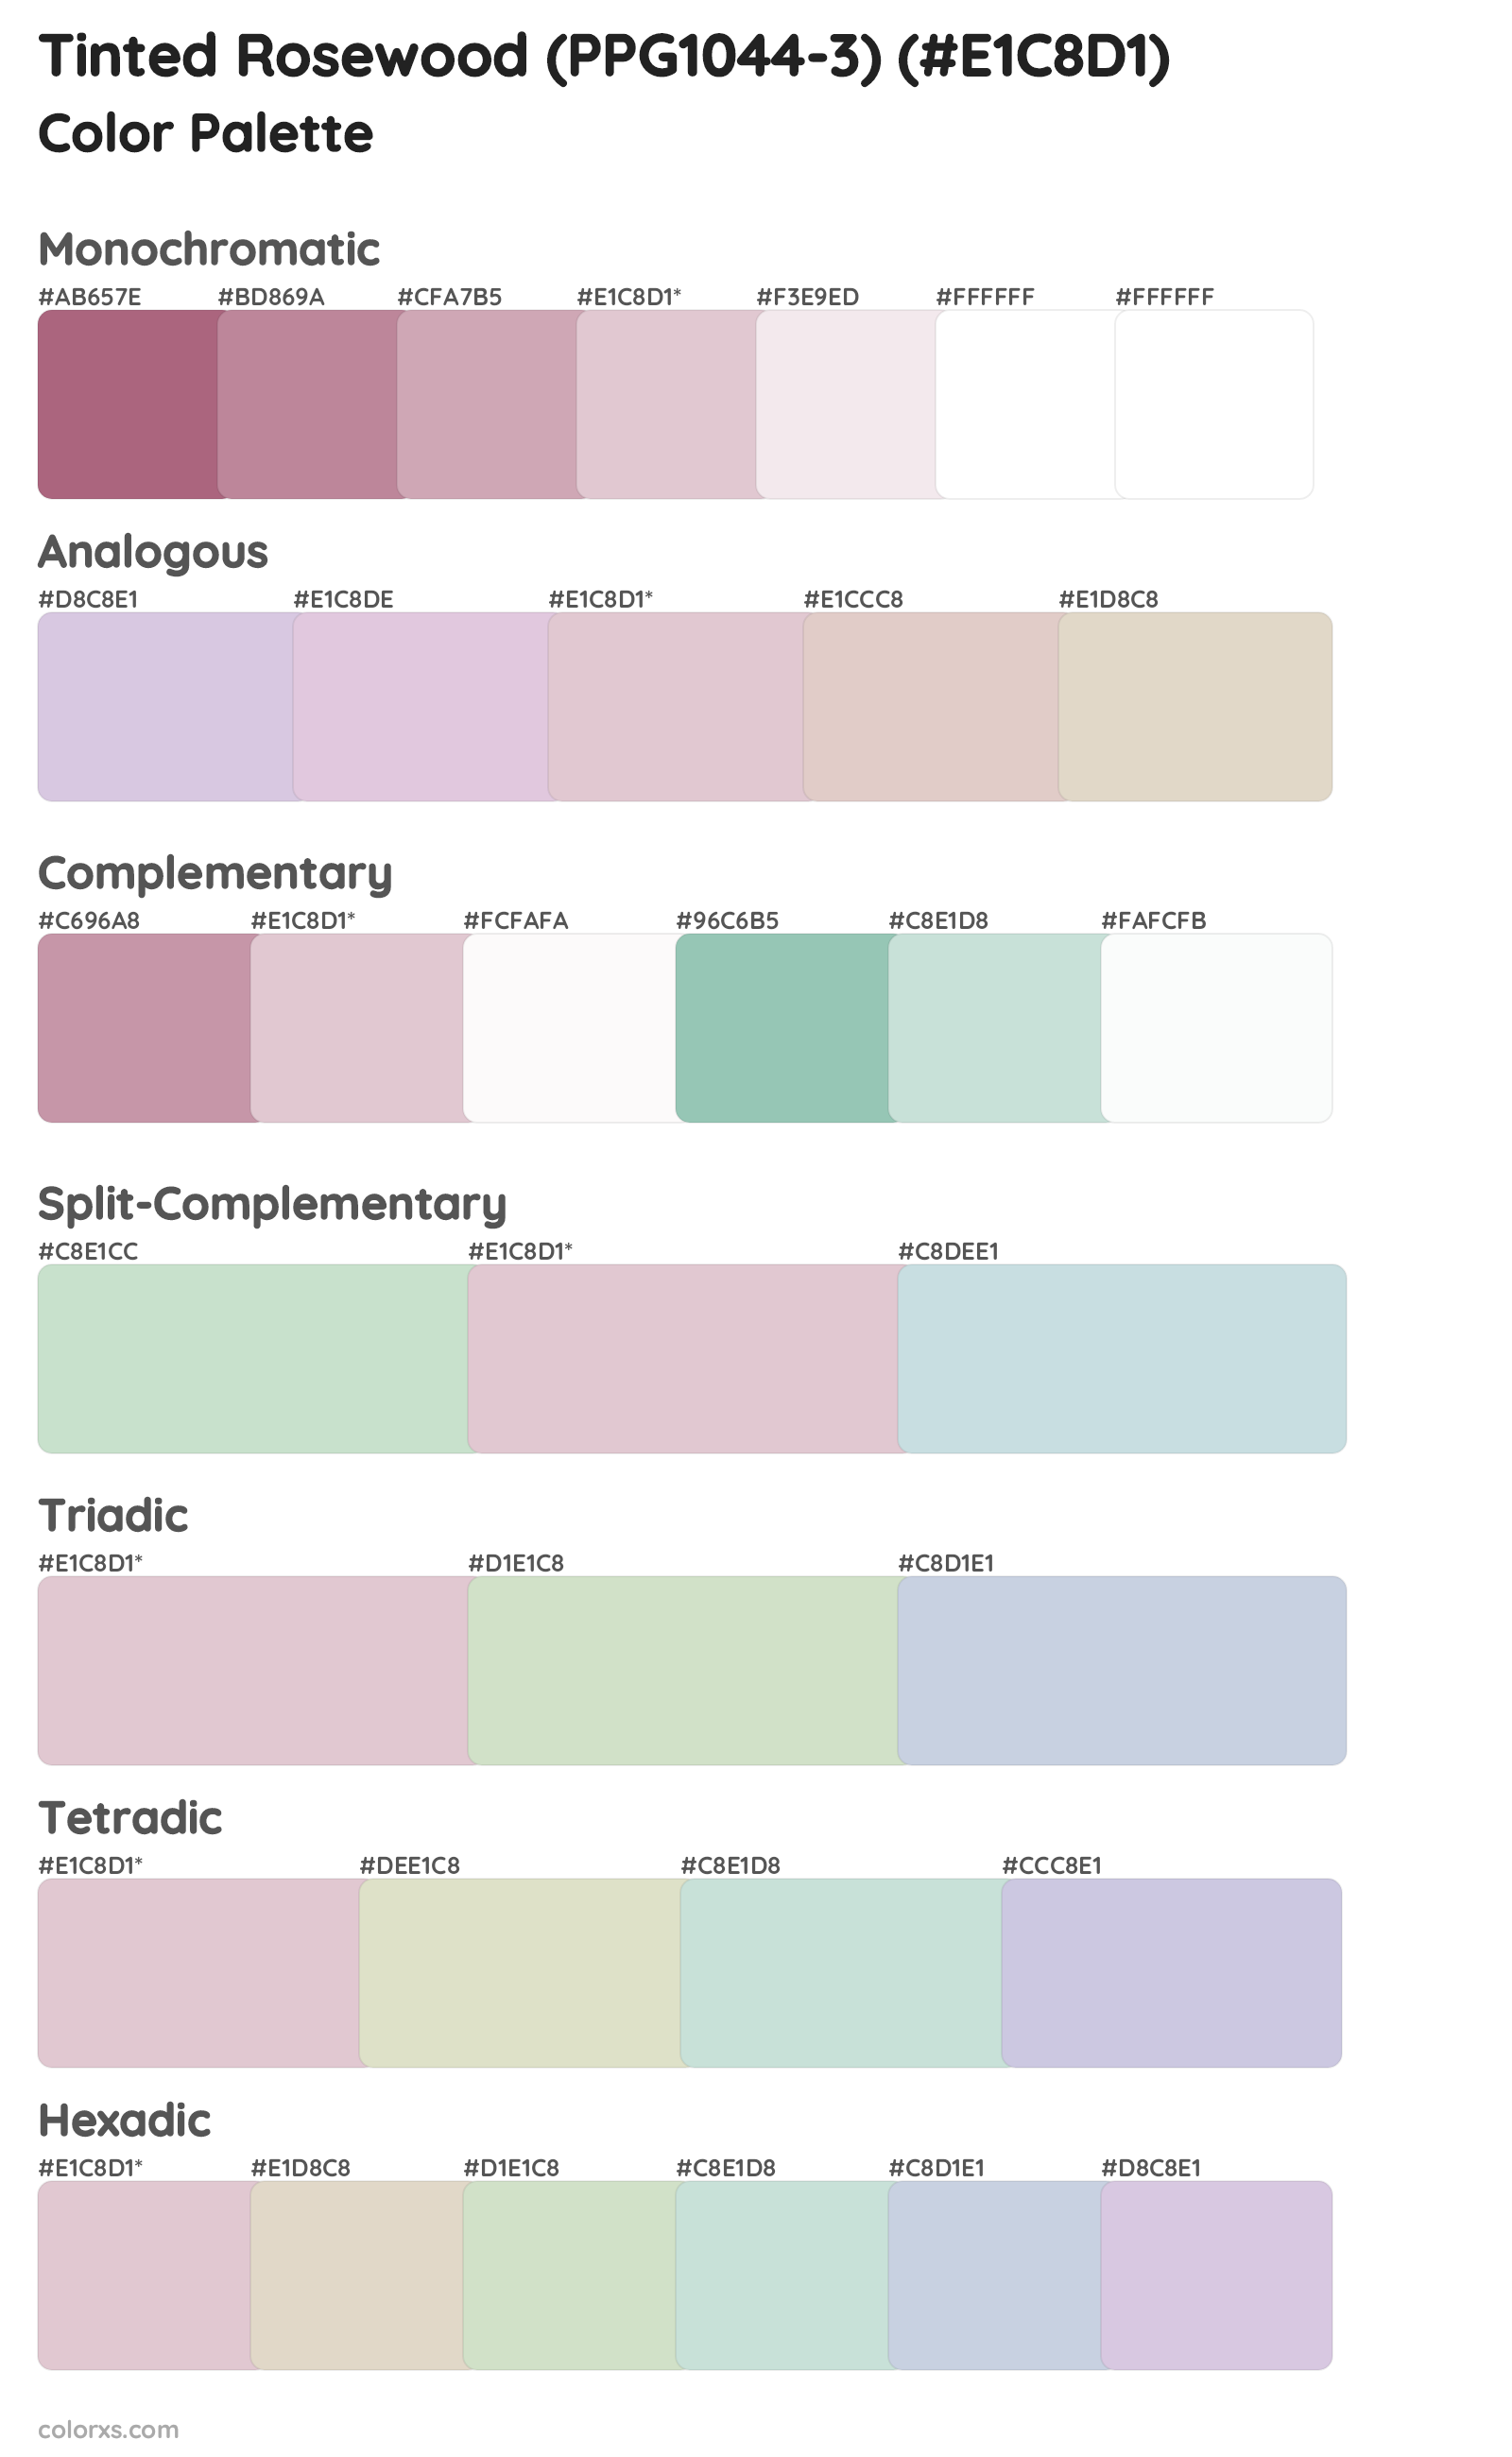 Tinted Rosewood (PPG1044-3) Color Scheme Palettes